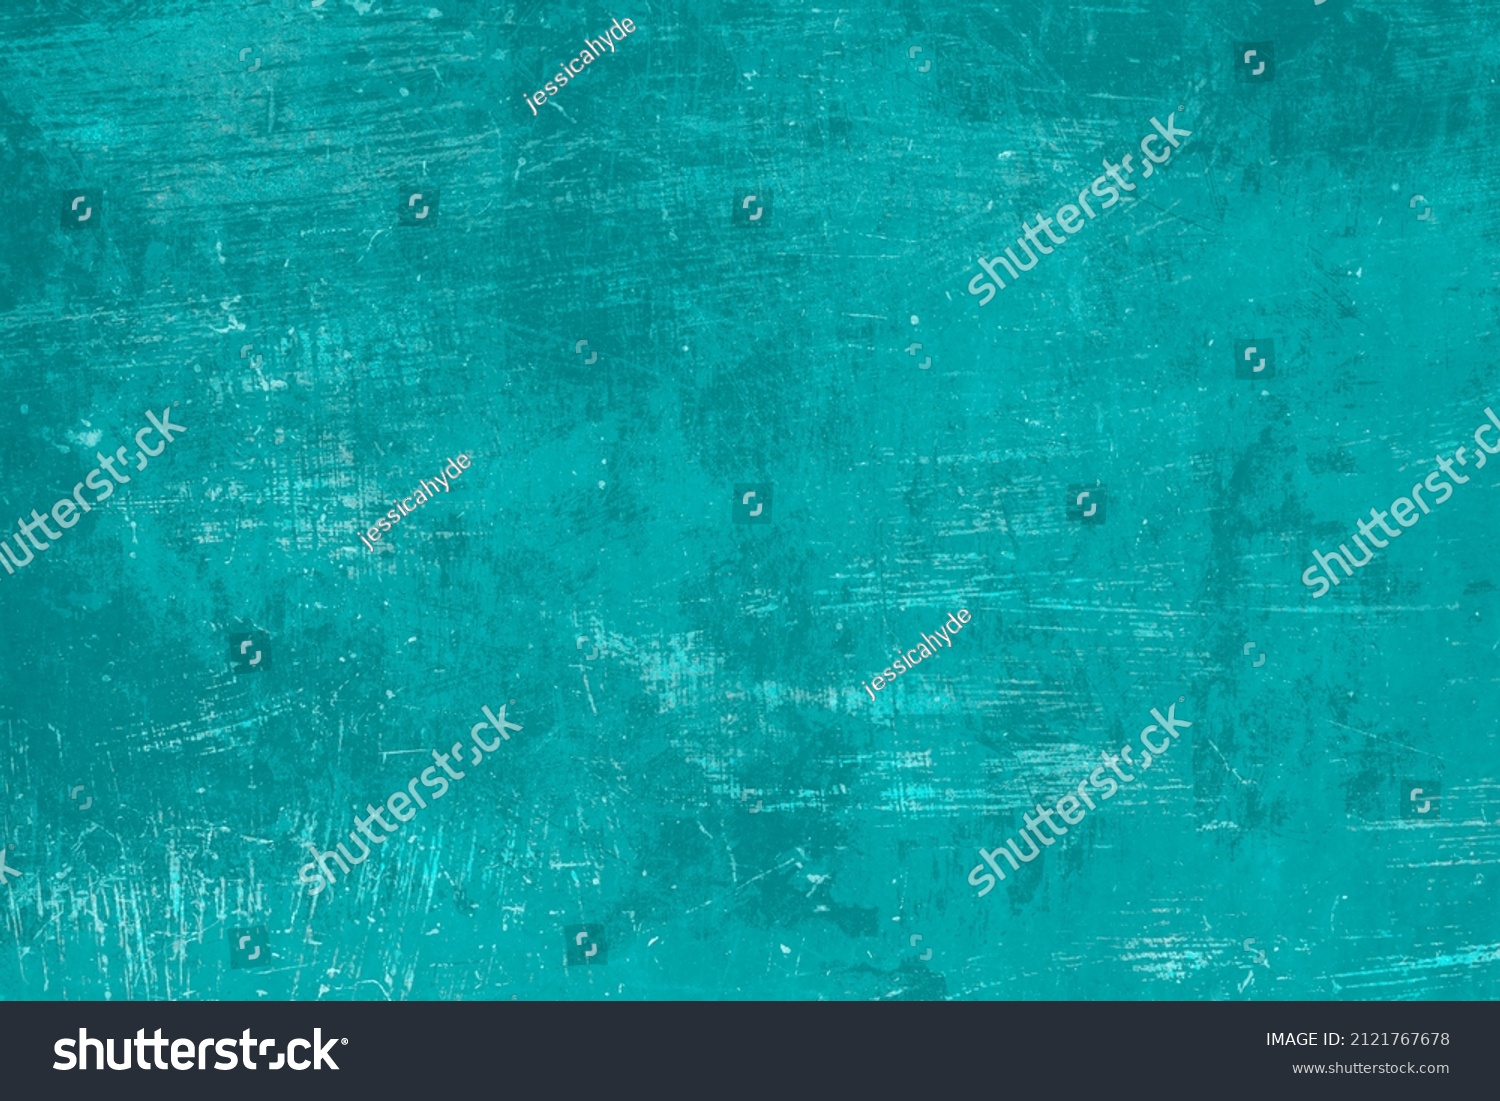 Old worn out turquoise colored metal sheet background, grunge texture  #2121767678